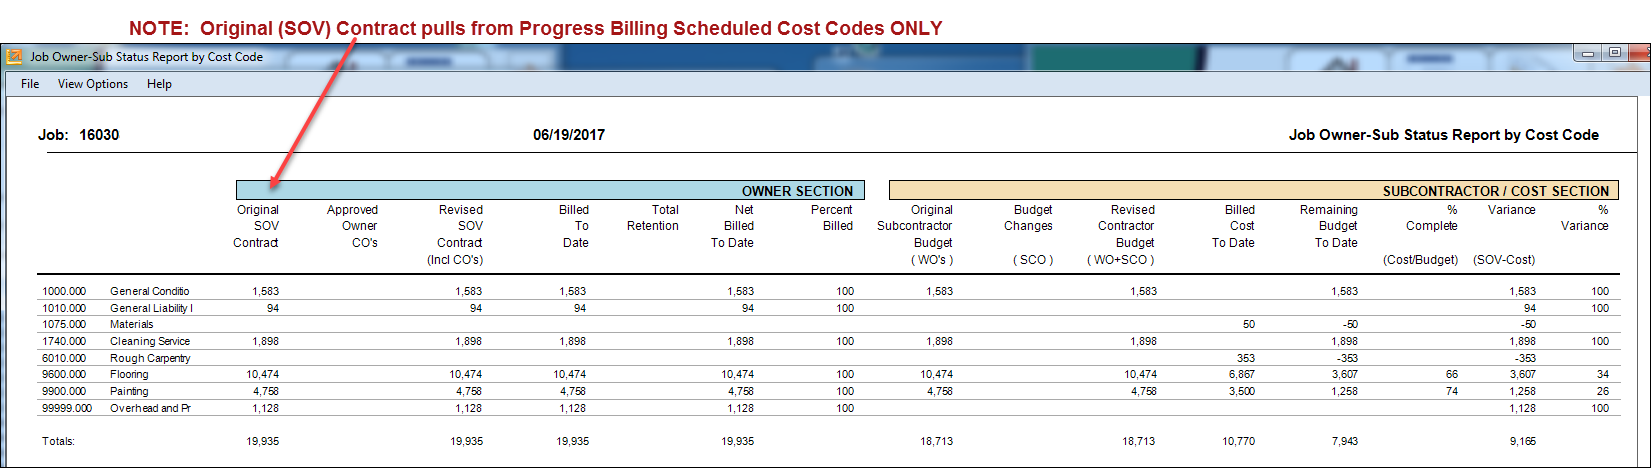 13-04-03 - Job Owner-Sub-Cost Status Report by Cost Code